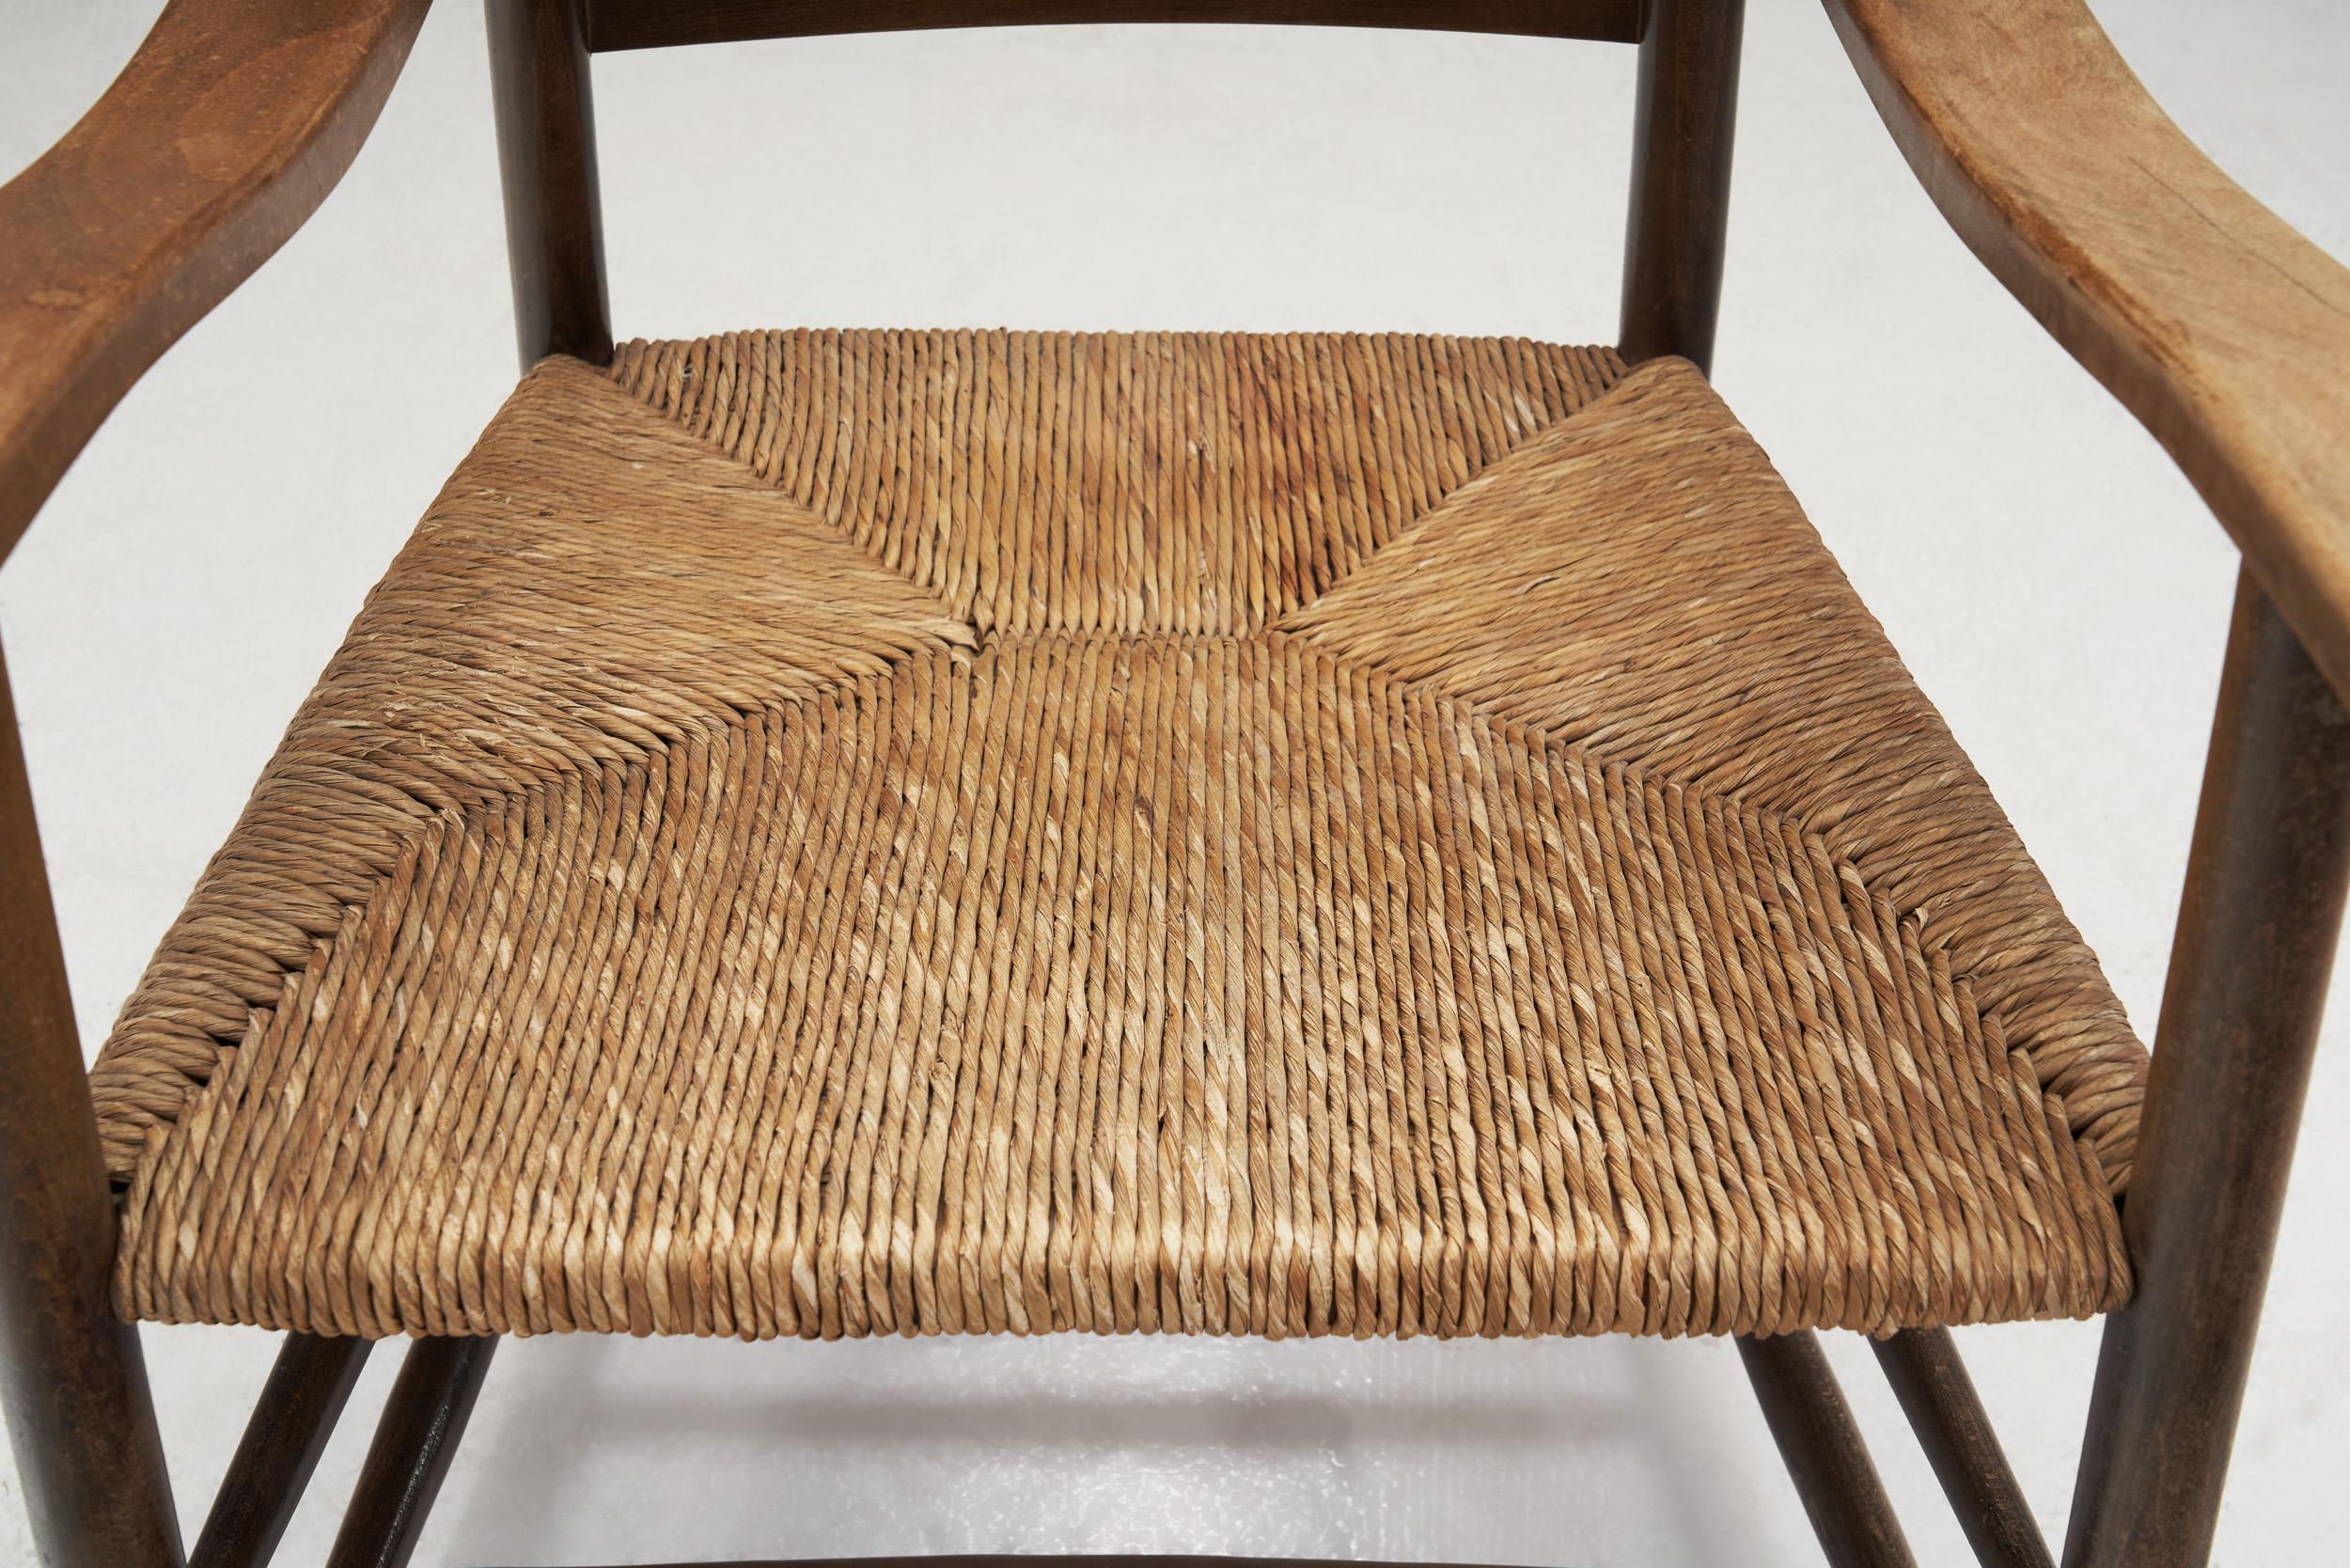 European Modernist Oak and Straw Armchairs, Europe, 1960s For Sale 6